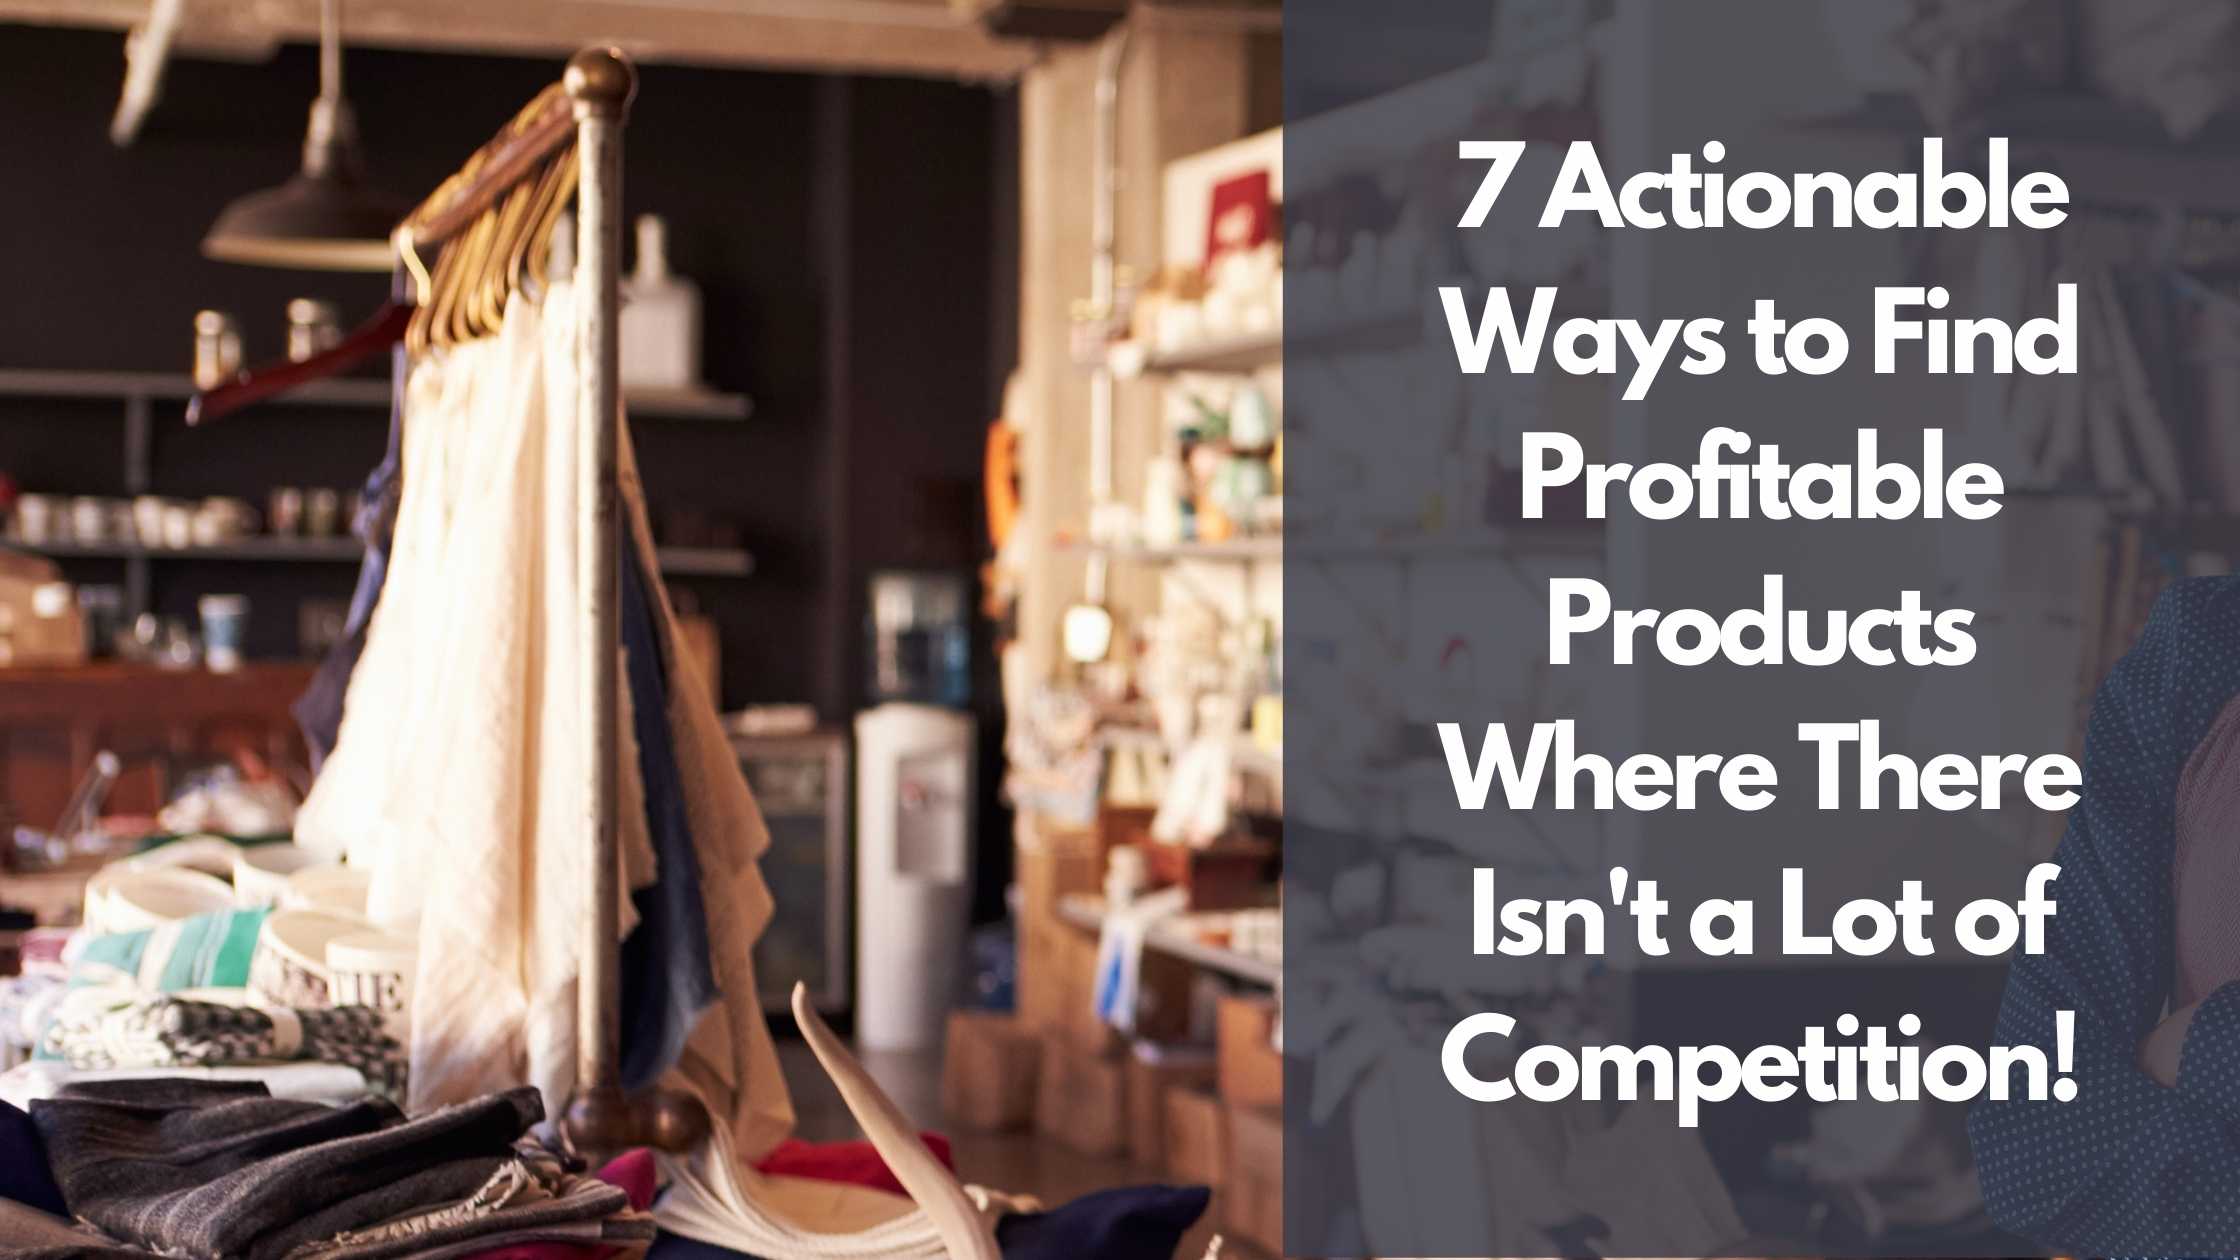 7 Actionable Ways to Find Profitable Products Where There Isn't a Lot of Competition Today